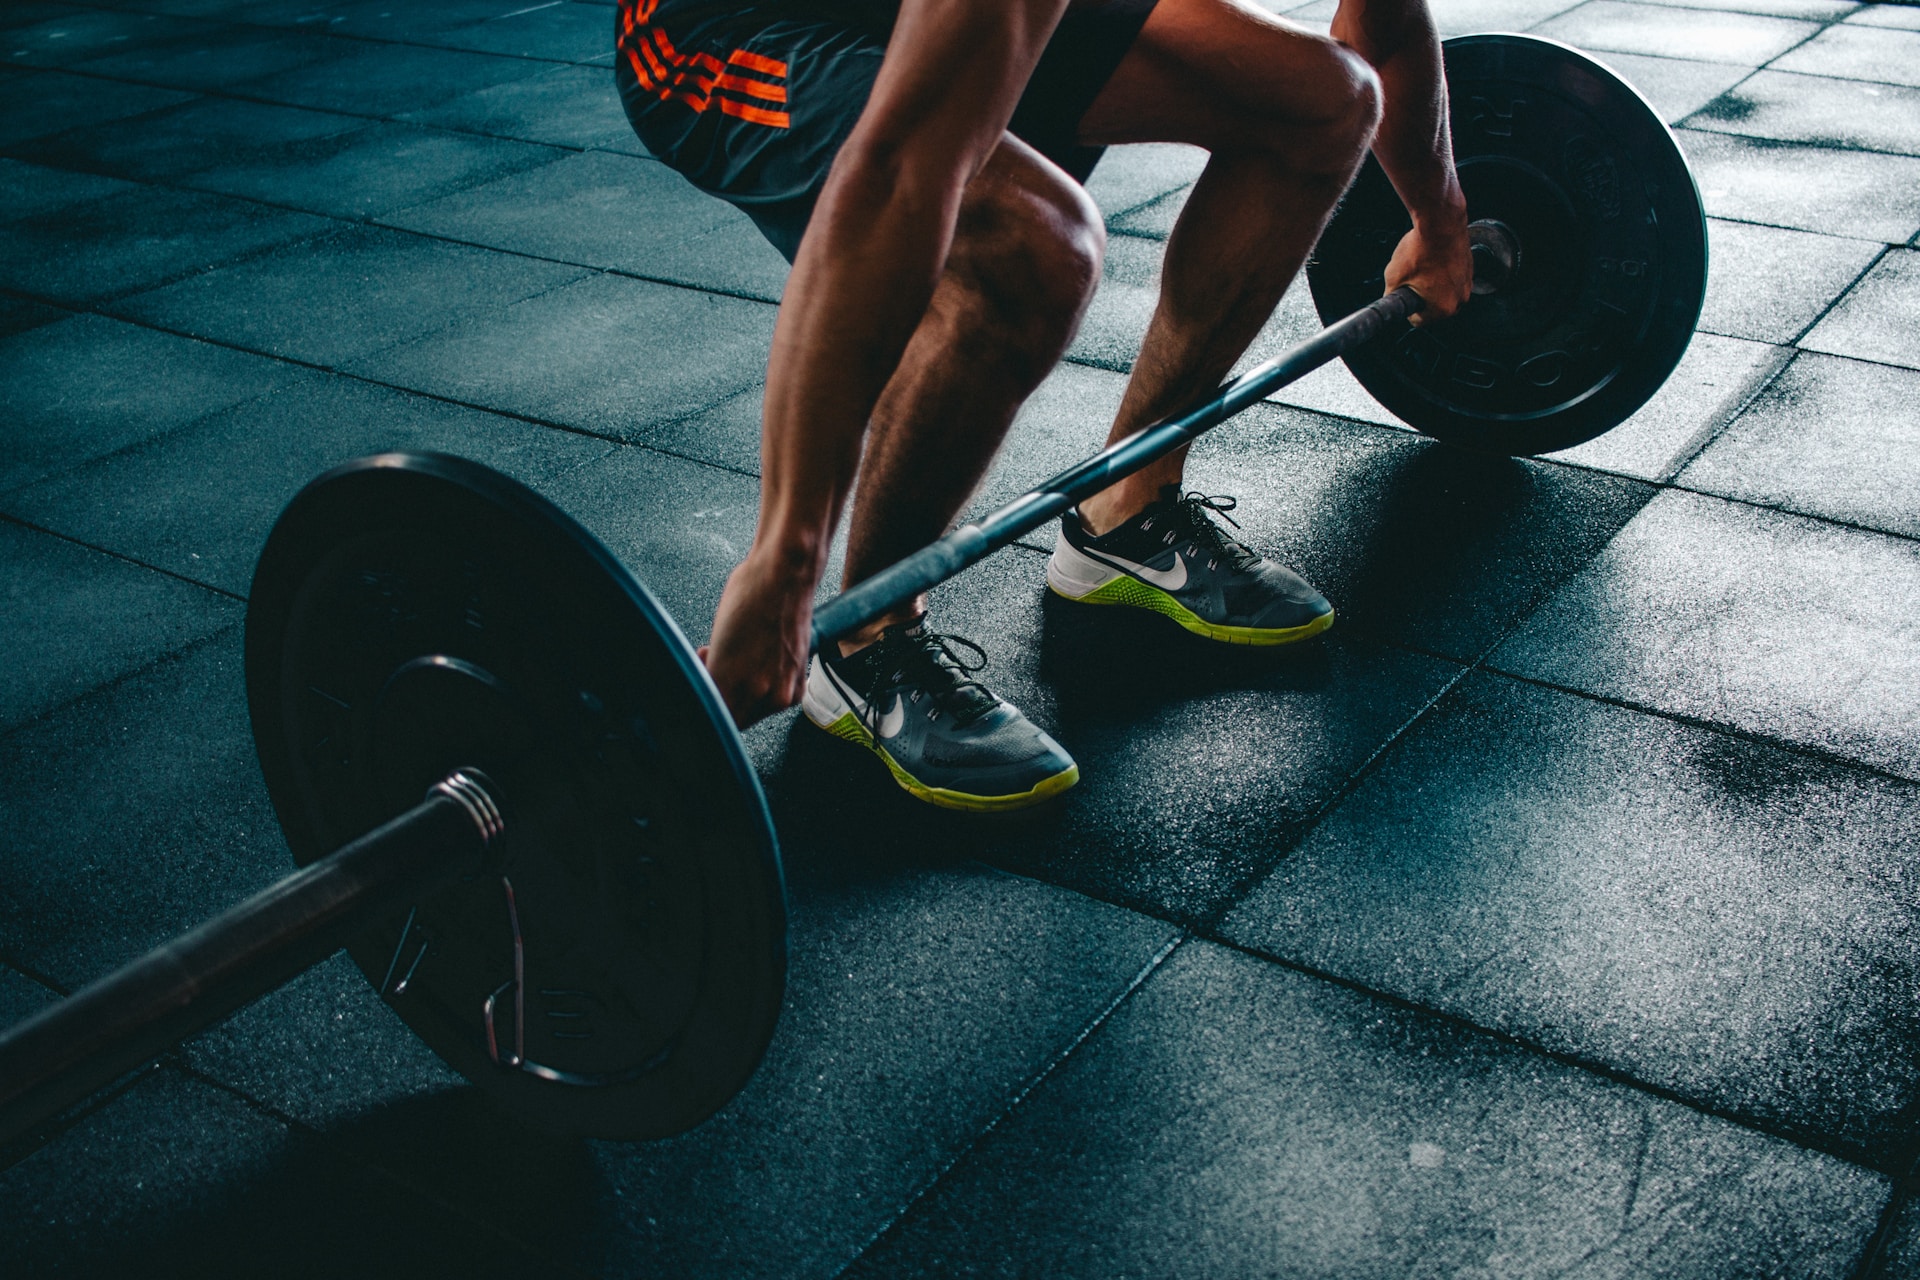 Weight Lifting Workouts and the Phenomenon they call “Pumping Iron"